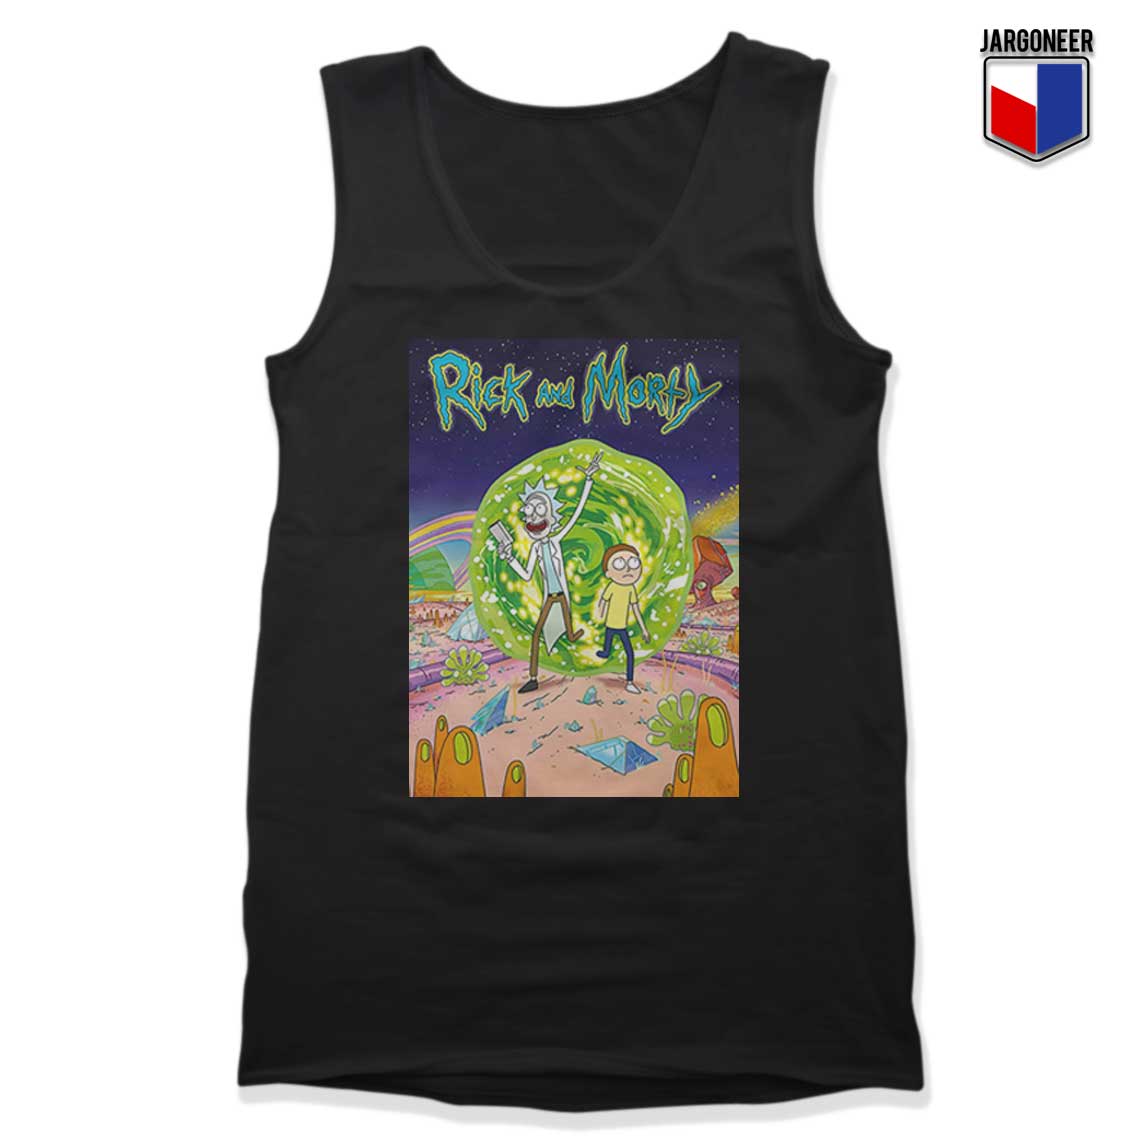 Rick and Morty TV Series Tank Top - Shop Unique Graphic Cool Shirt Designs